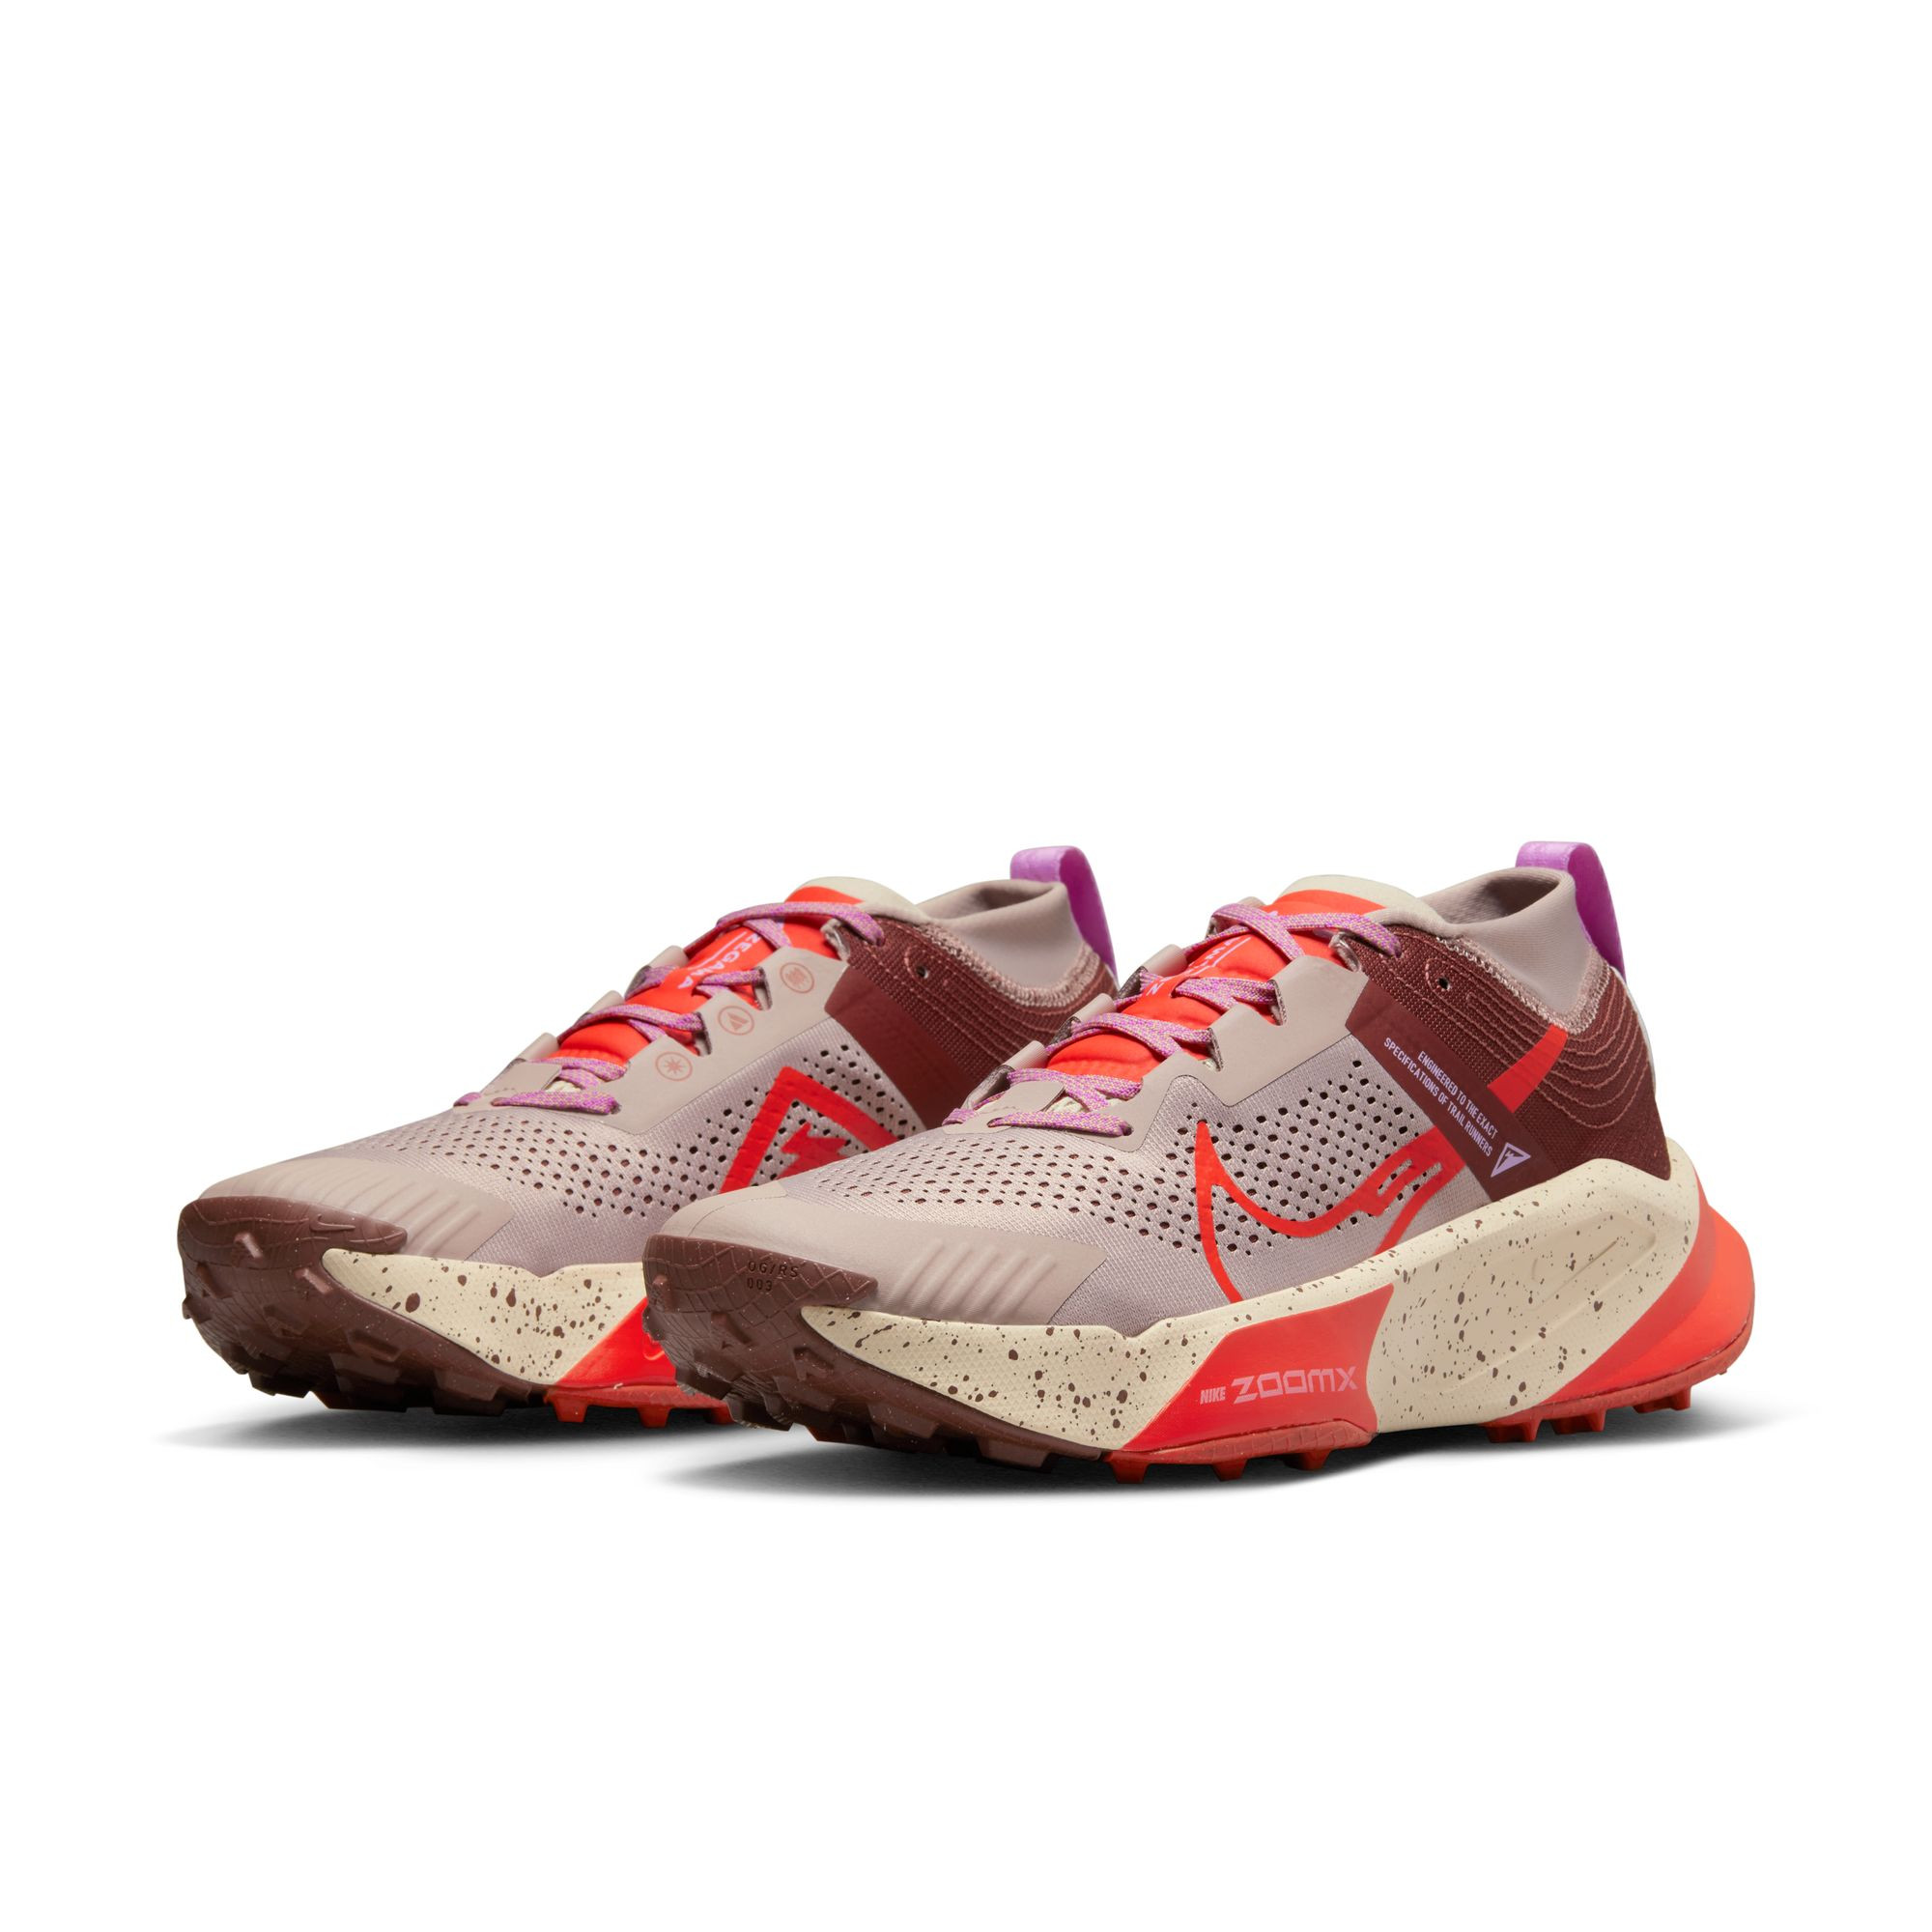 Chaussures trail Nike ZoomX Zegama - Taupe Diffus/Rouge Picante-Poney Foncé - DH0623-200